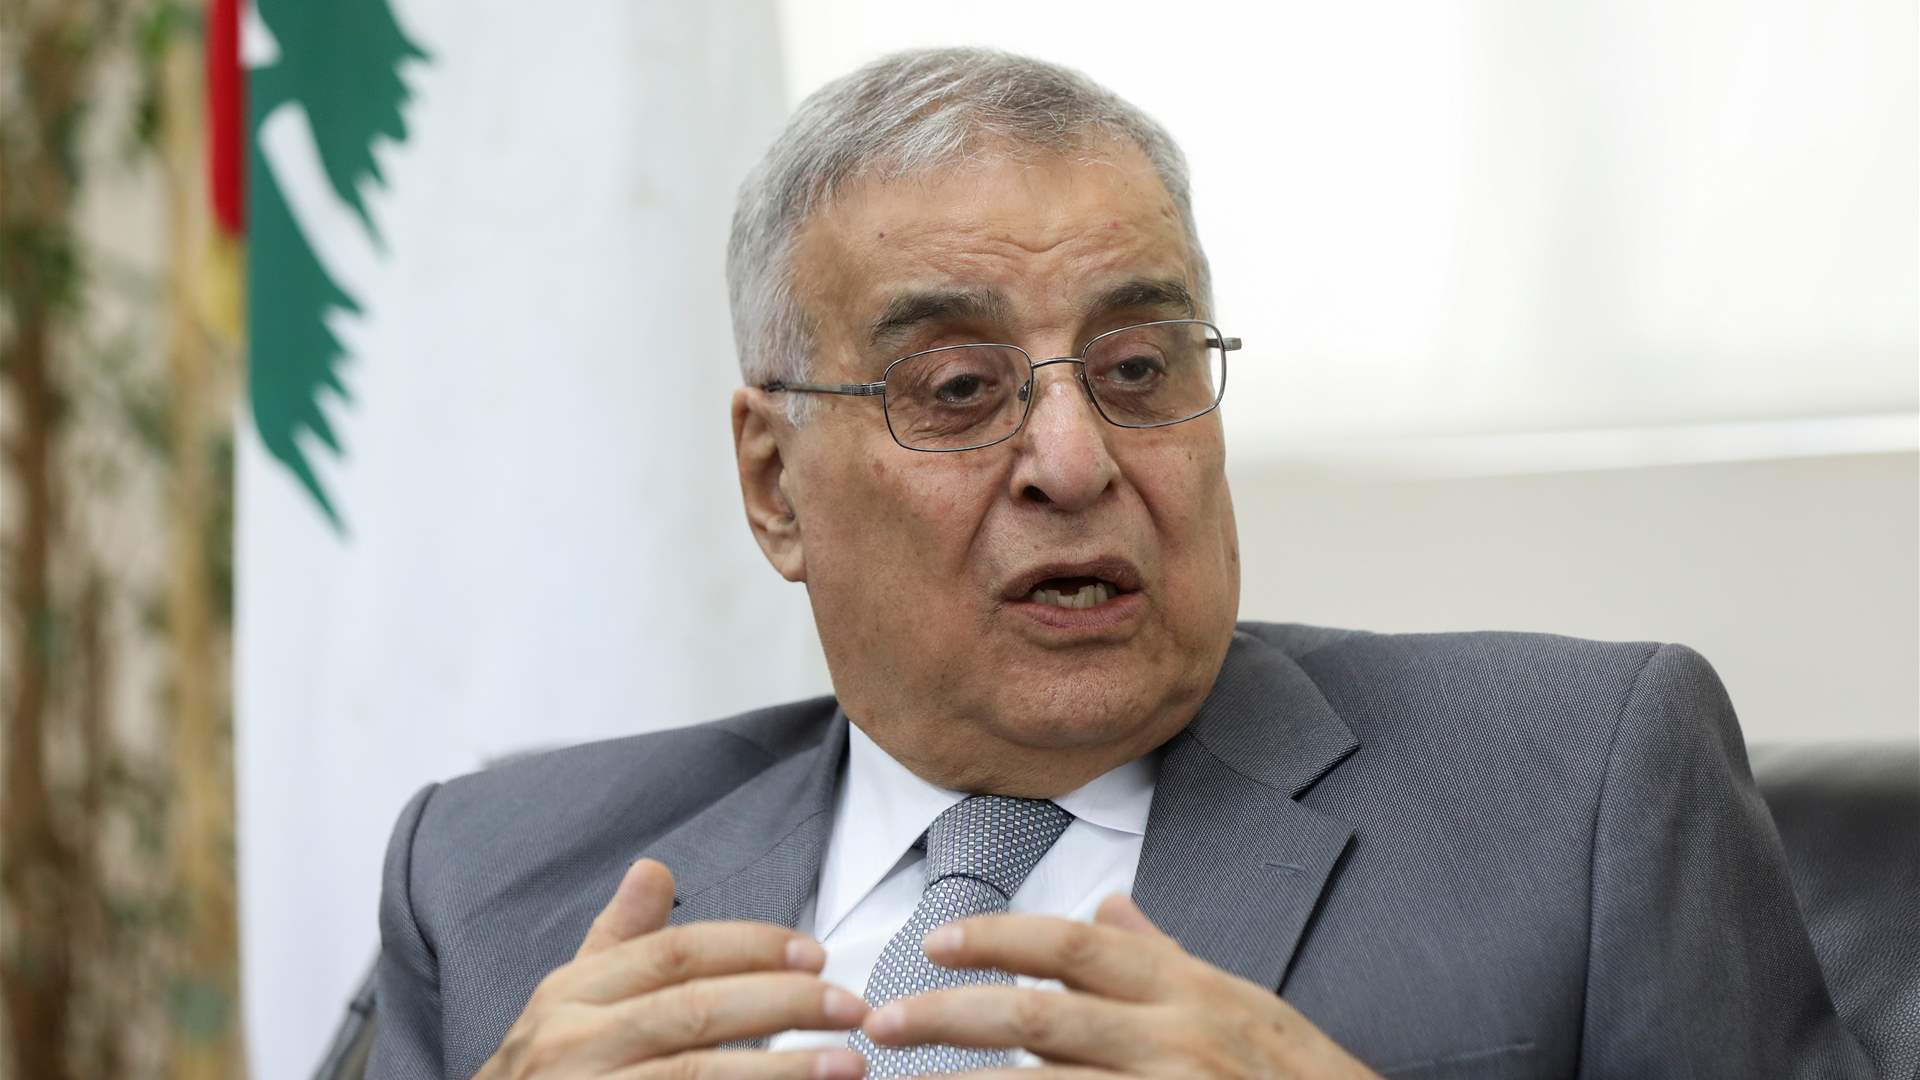 Vatican&#39;s supportive stance: Bou Habib discusses urgency of presidential elections in Lebanon